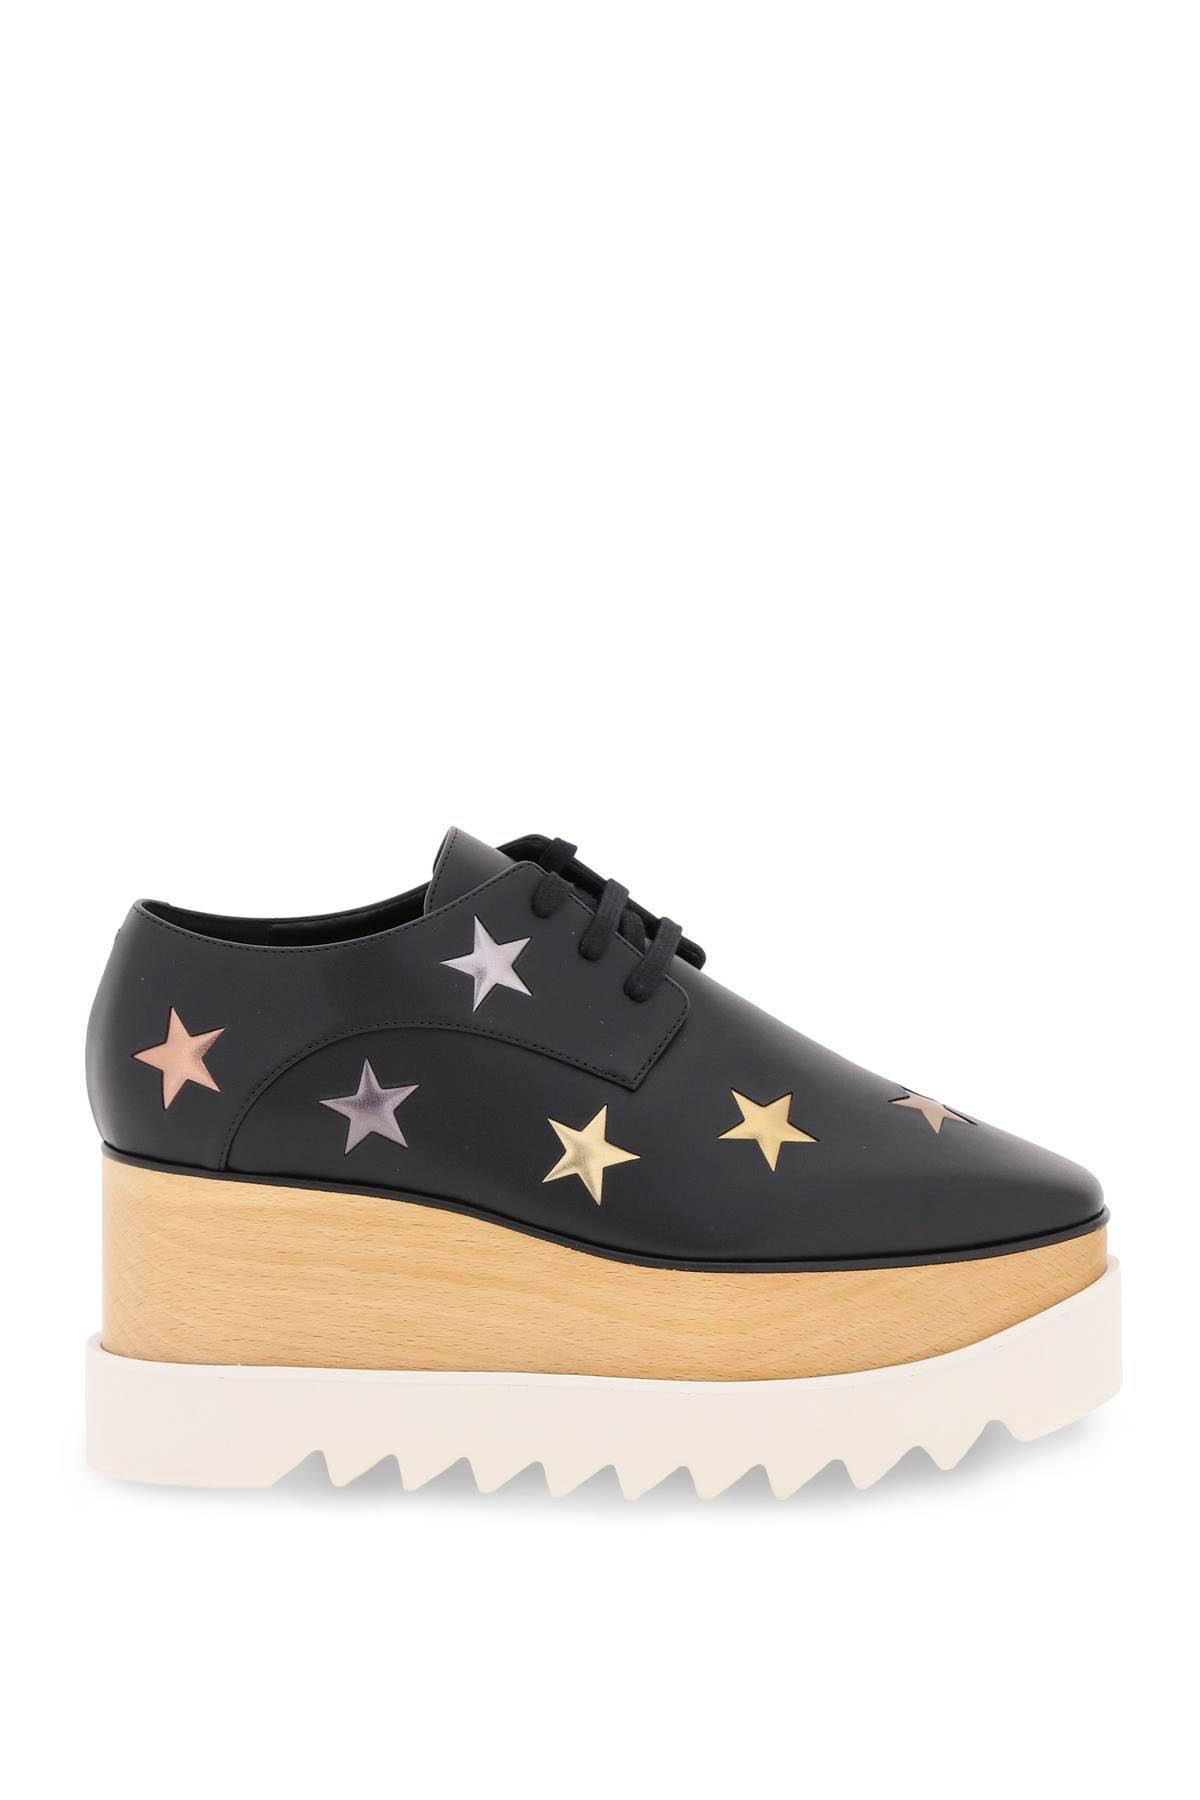 STELLA McCARTNEY ELYSE LACE-UP SHOES WITH STARS